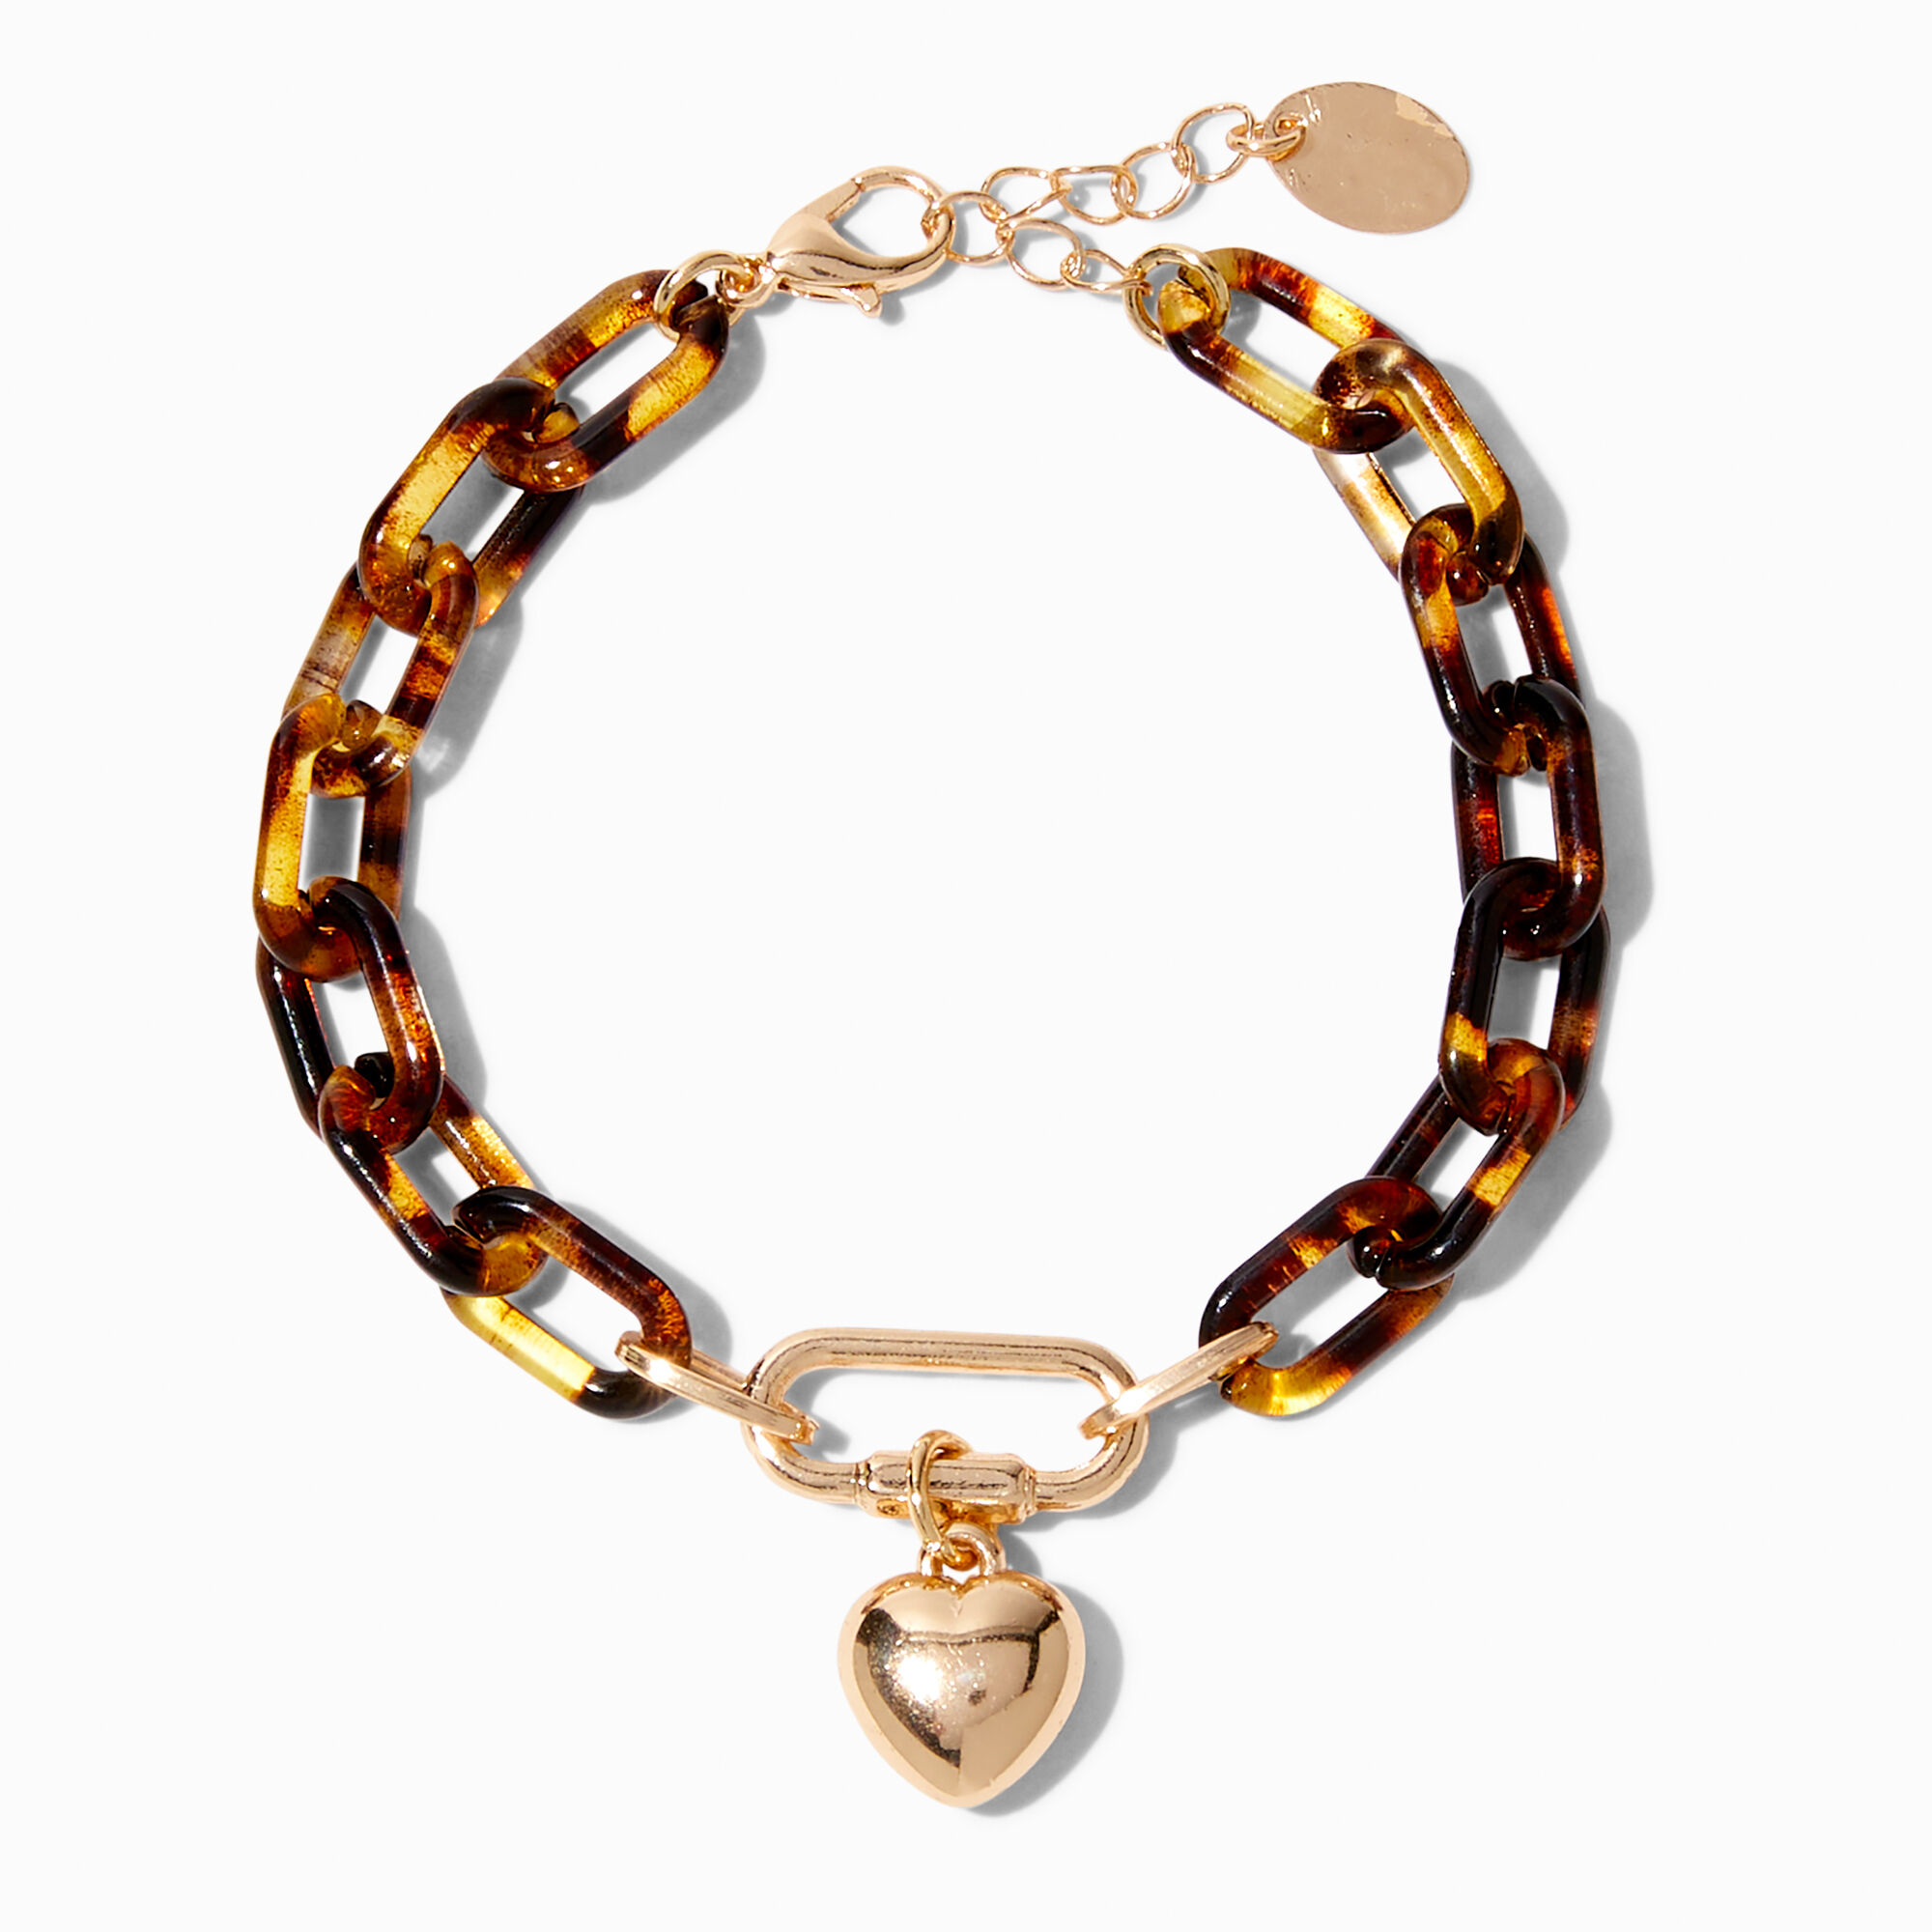 View Claires Chunky Tortoiseshell Chainlink Heart Carabiner Bracelet Gold information